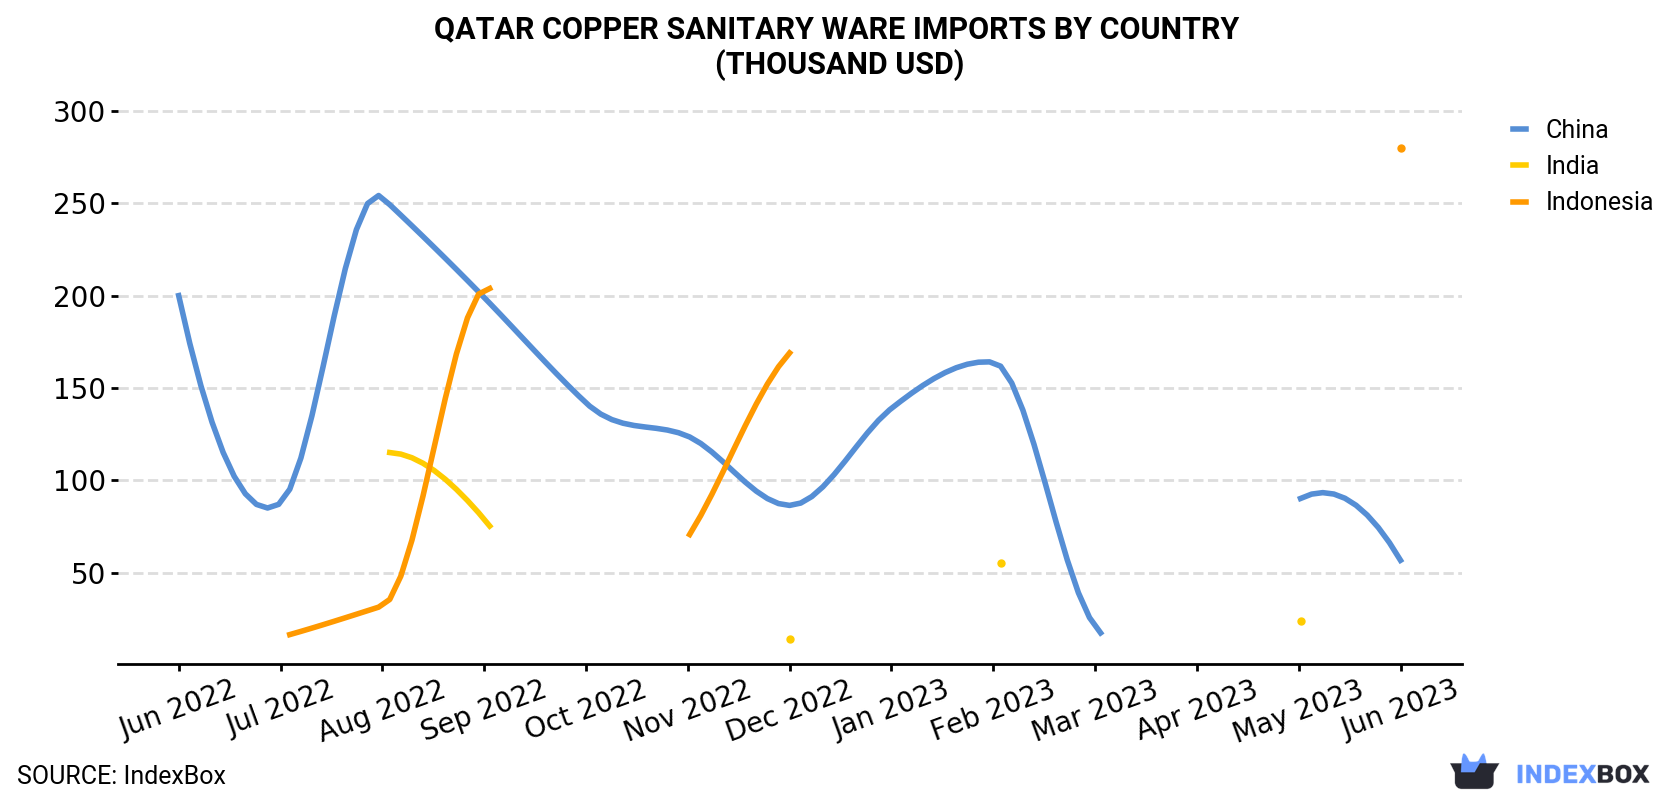 Qatar Copper Sanitary Ware Imports By Country (Thousand USD)